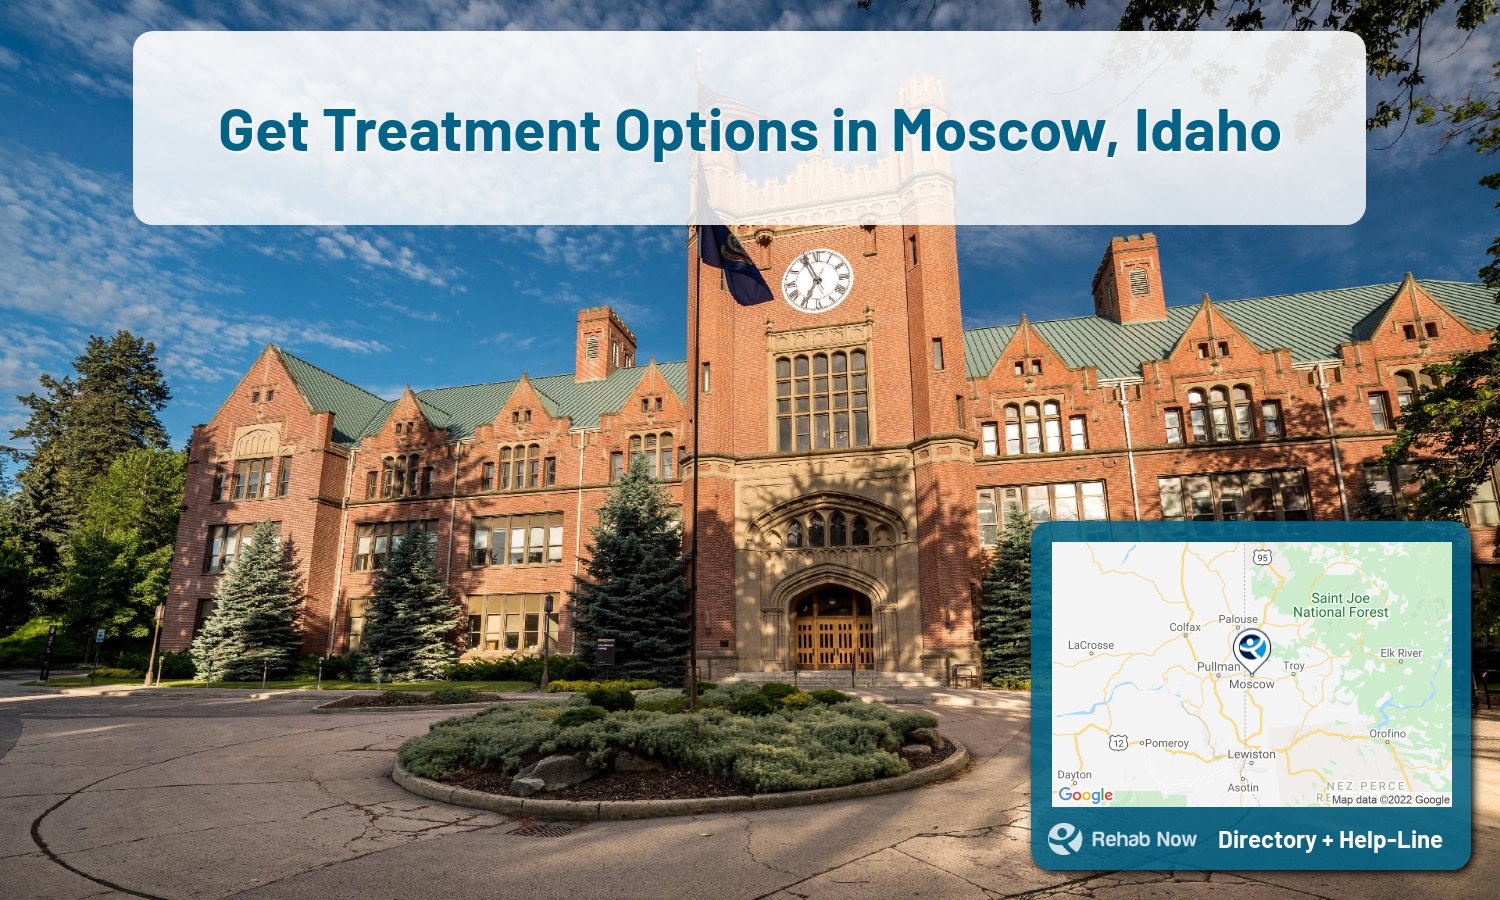 Moscow, ID Treatment Centers. Find drug rehab in Moscow, Idaho, or detox and treatment programs. Get the right help now!